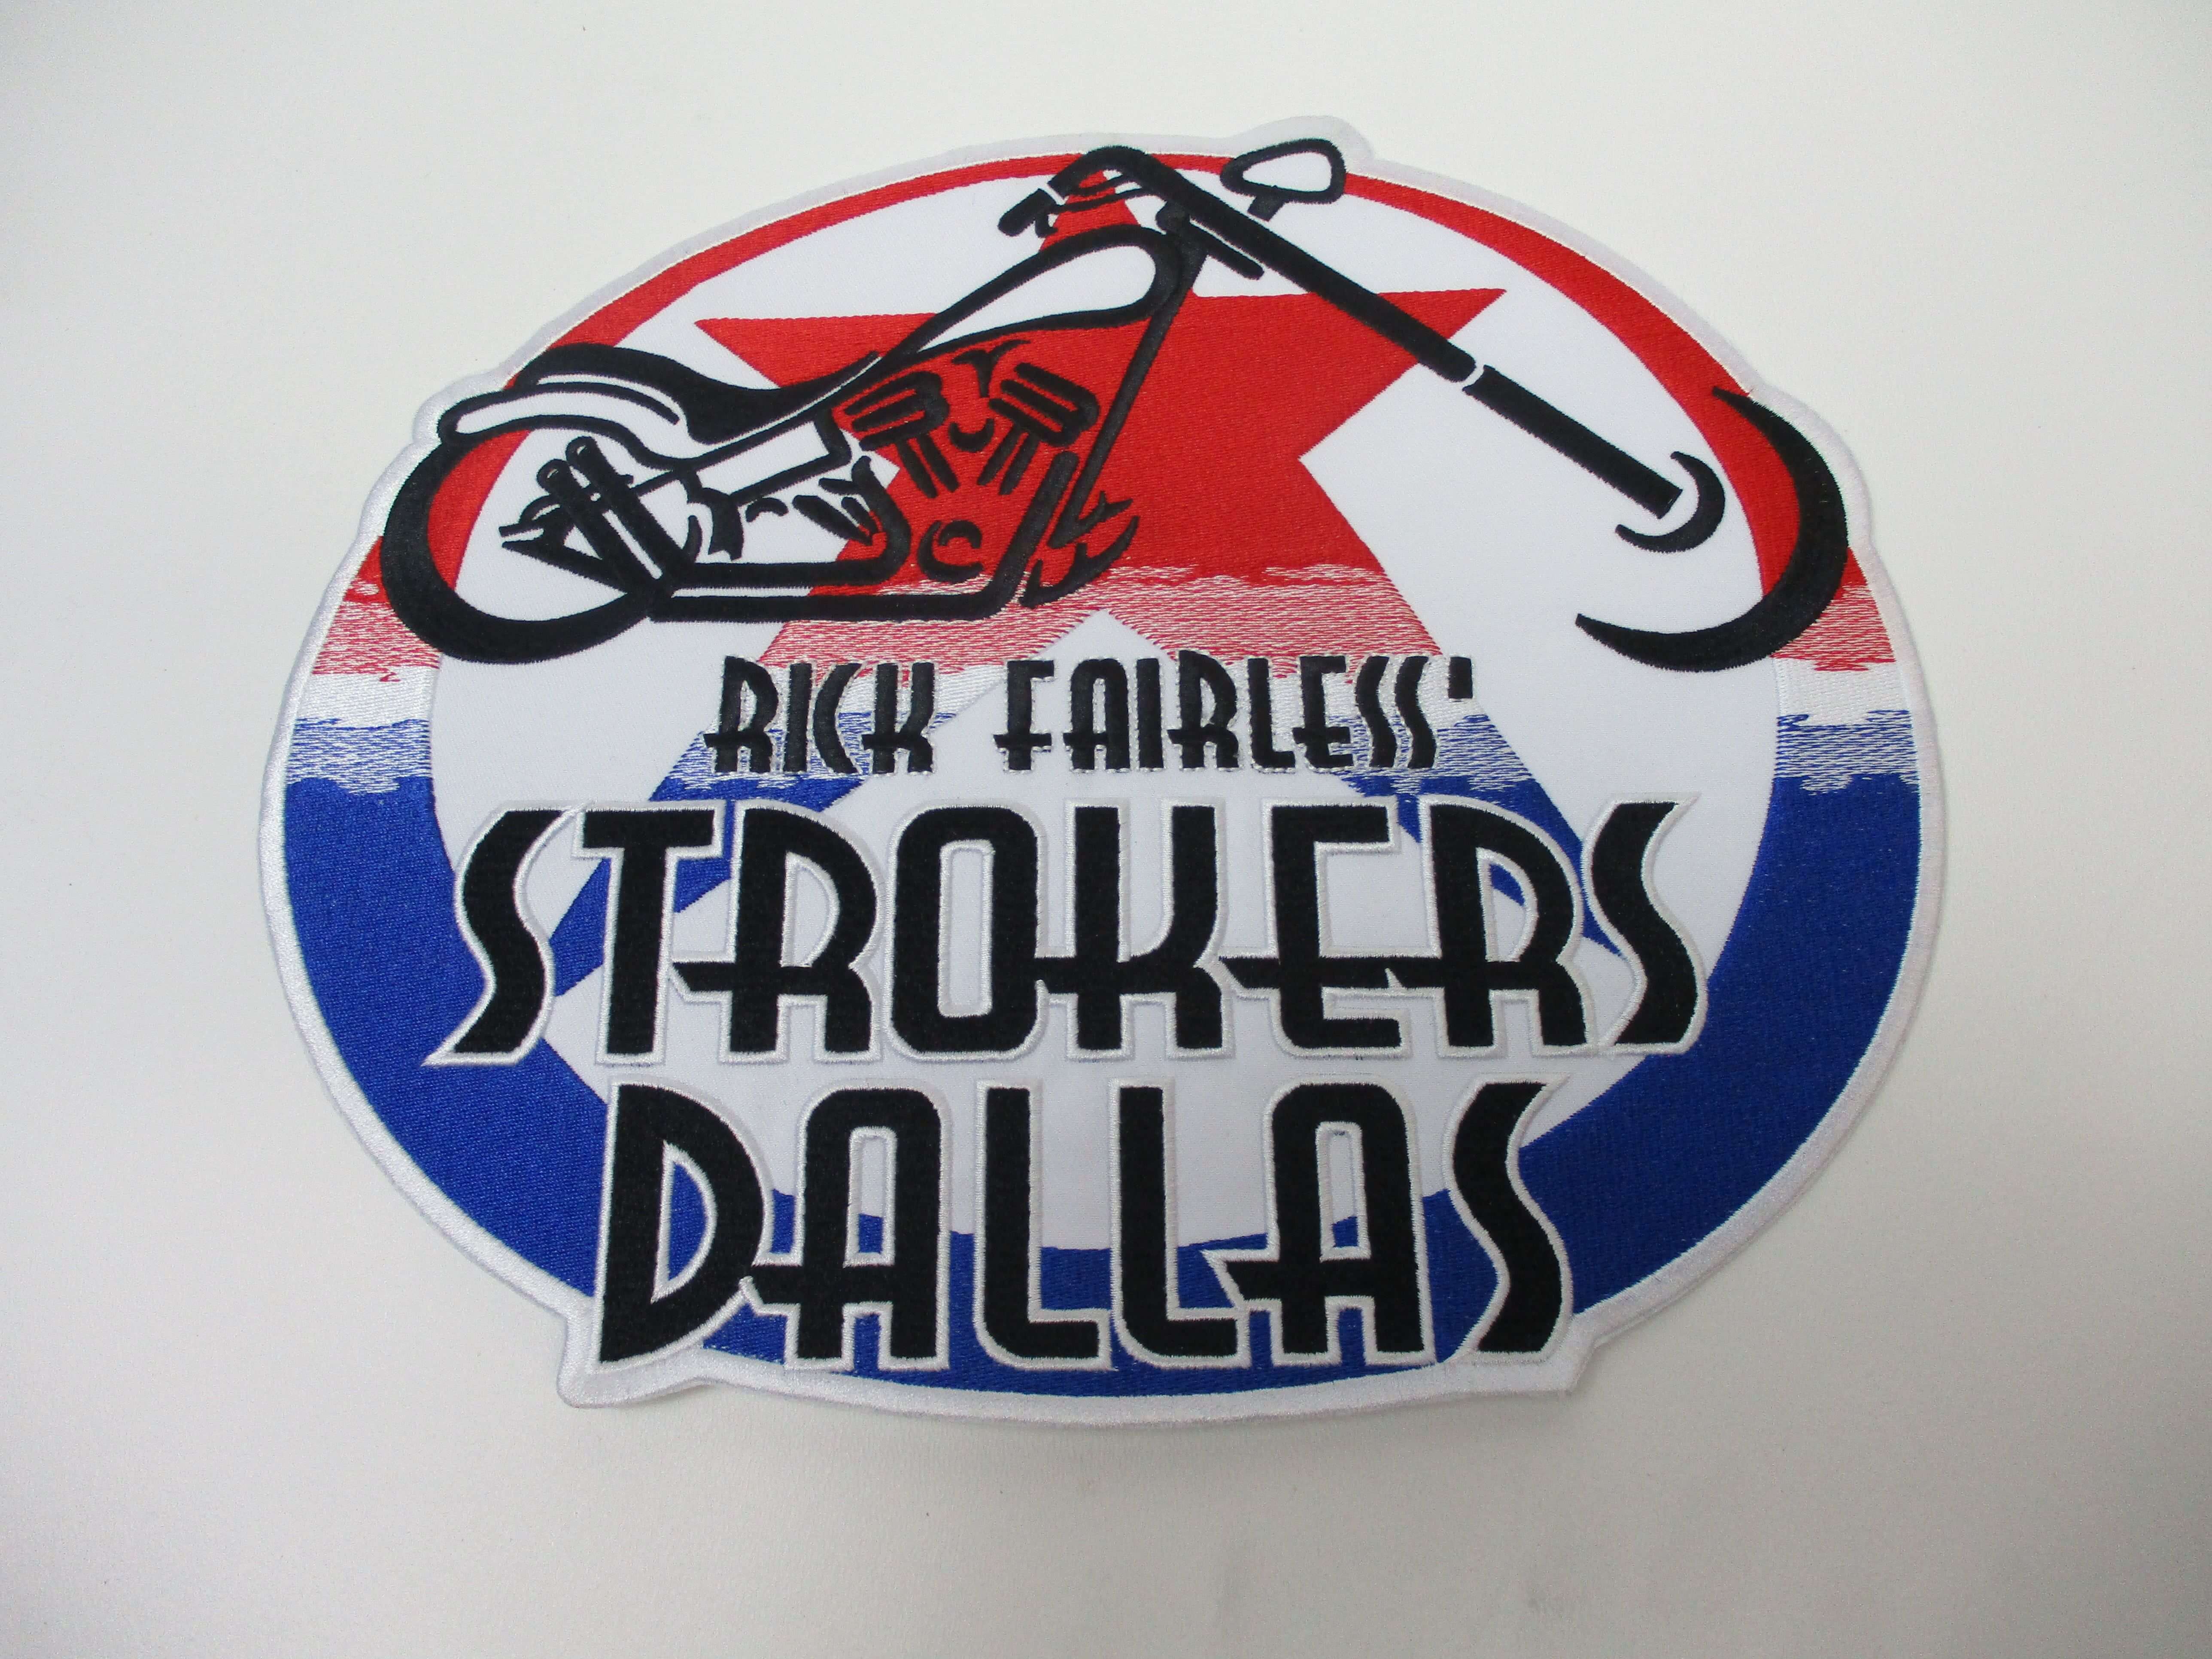 Red, White, and Blue 11" Patch